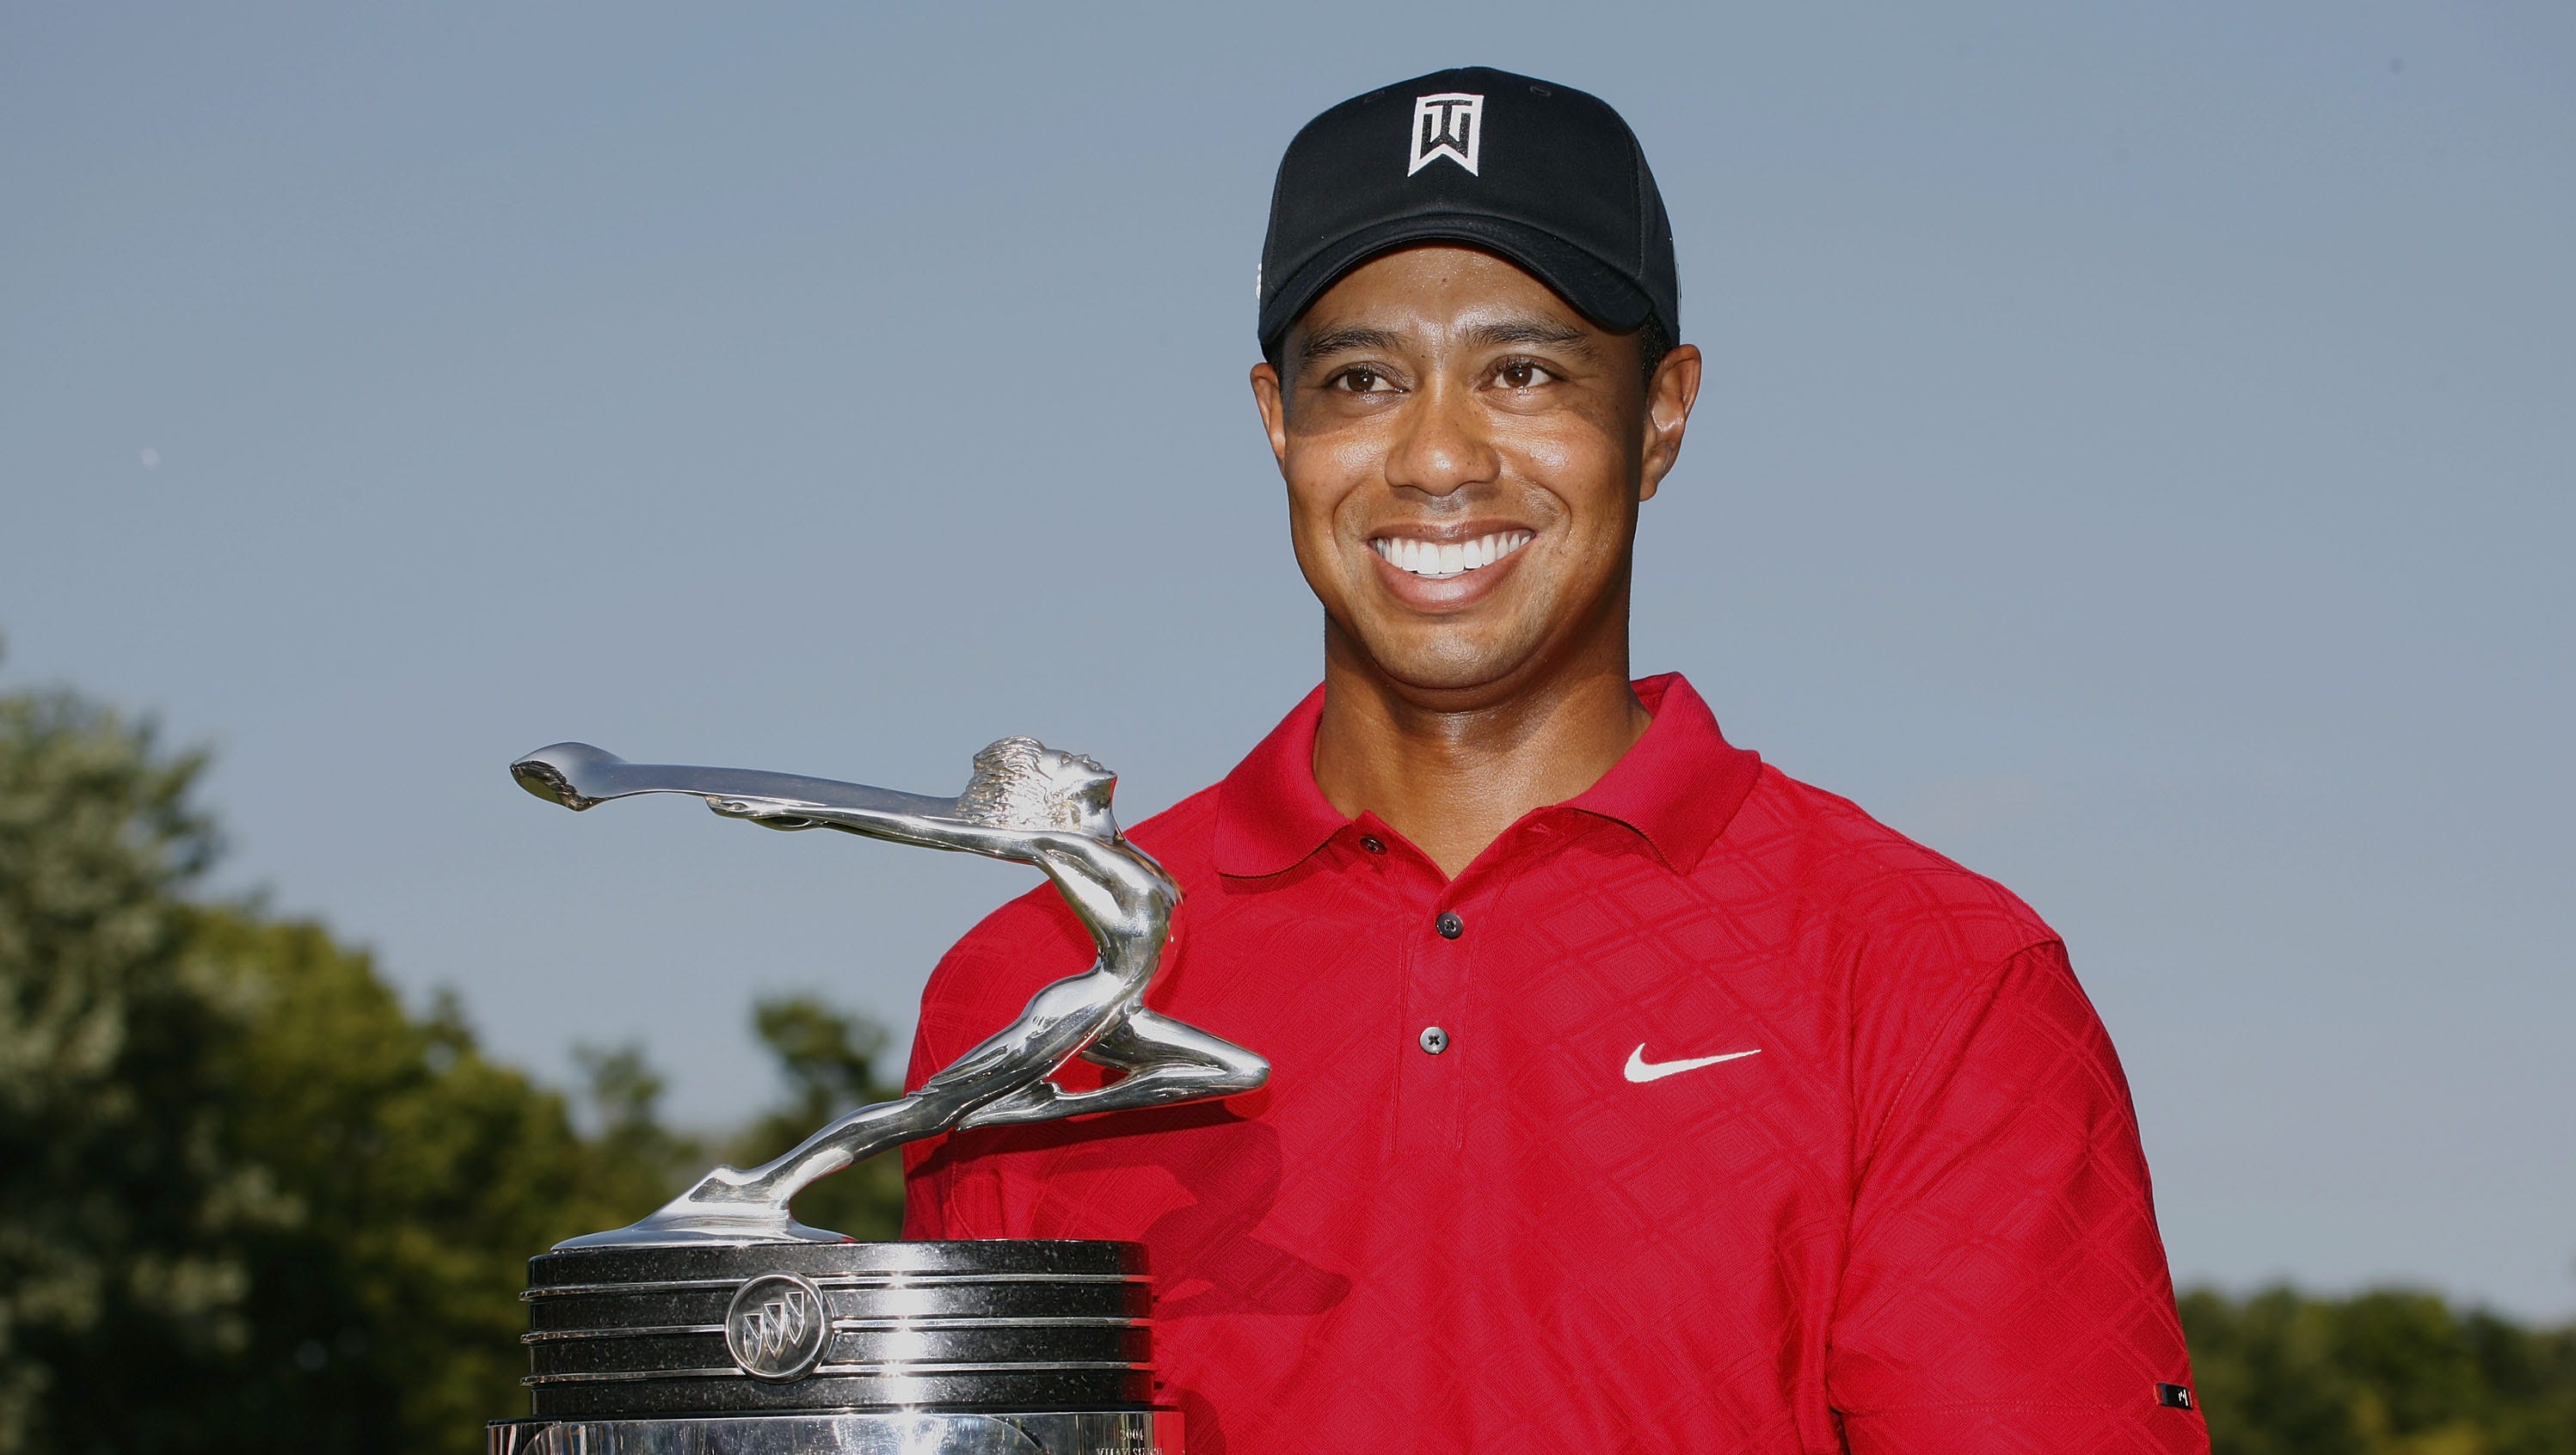 The last PGA Tour event in Michigan was the 2009 Buick Open, won by Tiger Woods, at Warwick Hills in Grand Blanc.